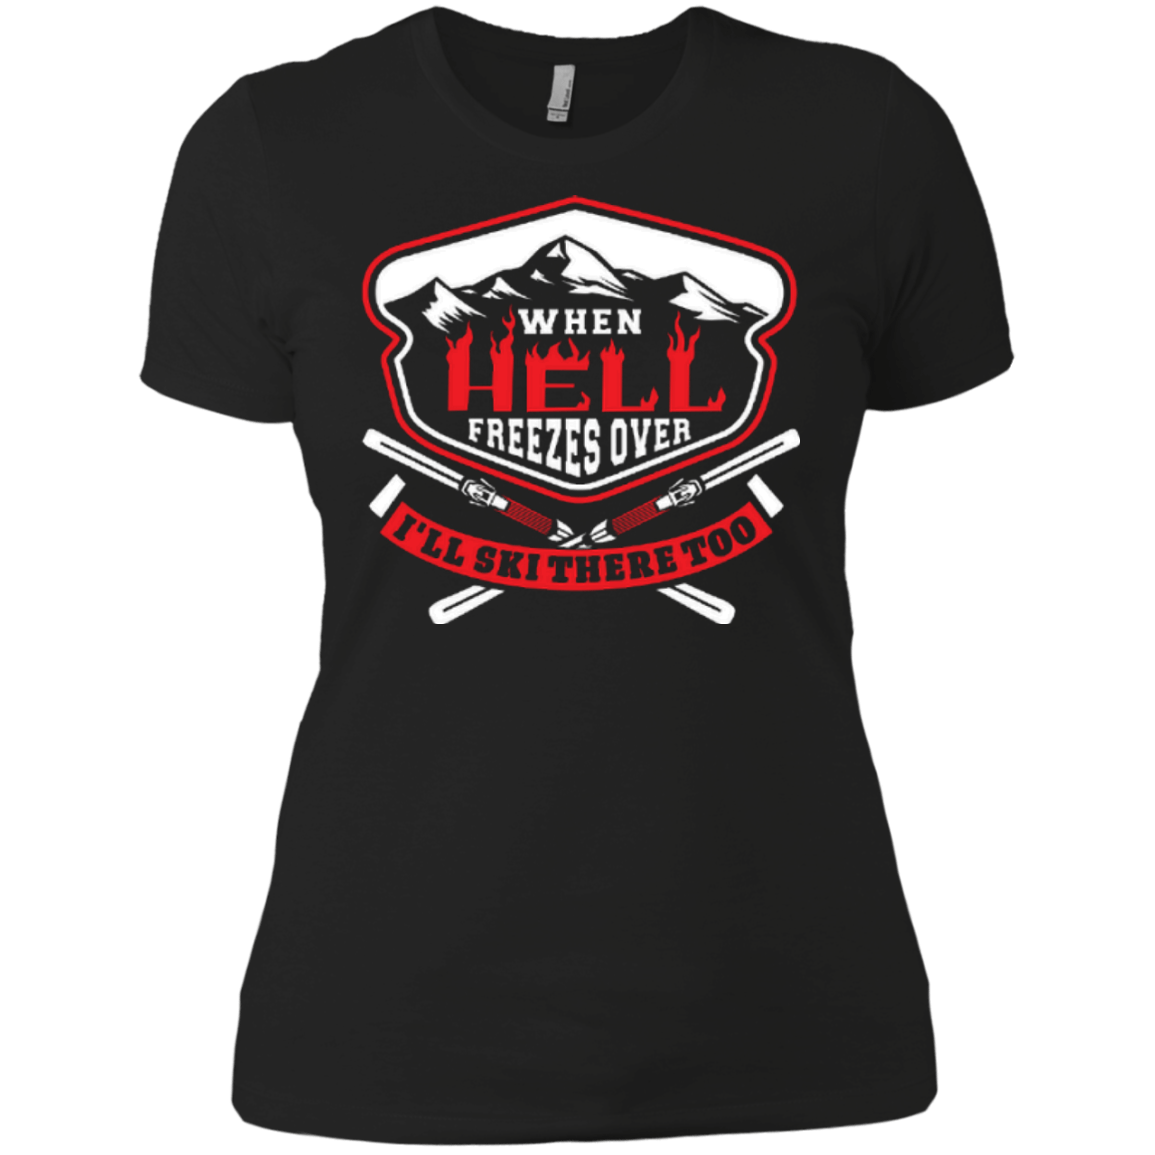 When Hell Freezes Over I'll Ski There Too Ladies Tees - Powderaddicts